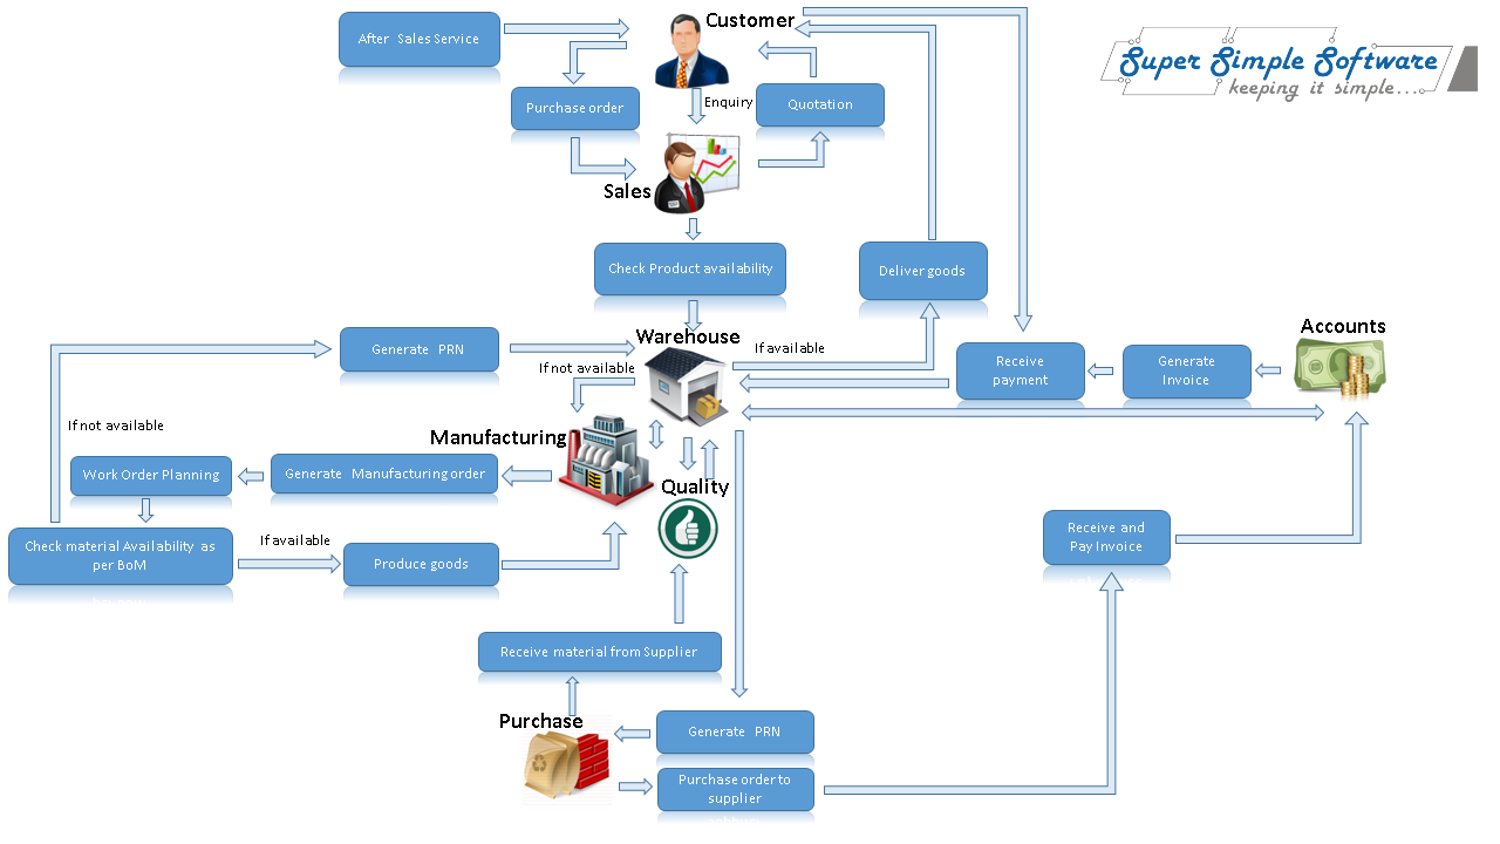 SuperSimpleSoftware BusinessCenter Manufacturing industry process cycle